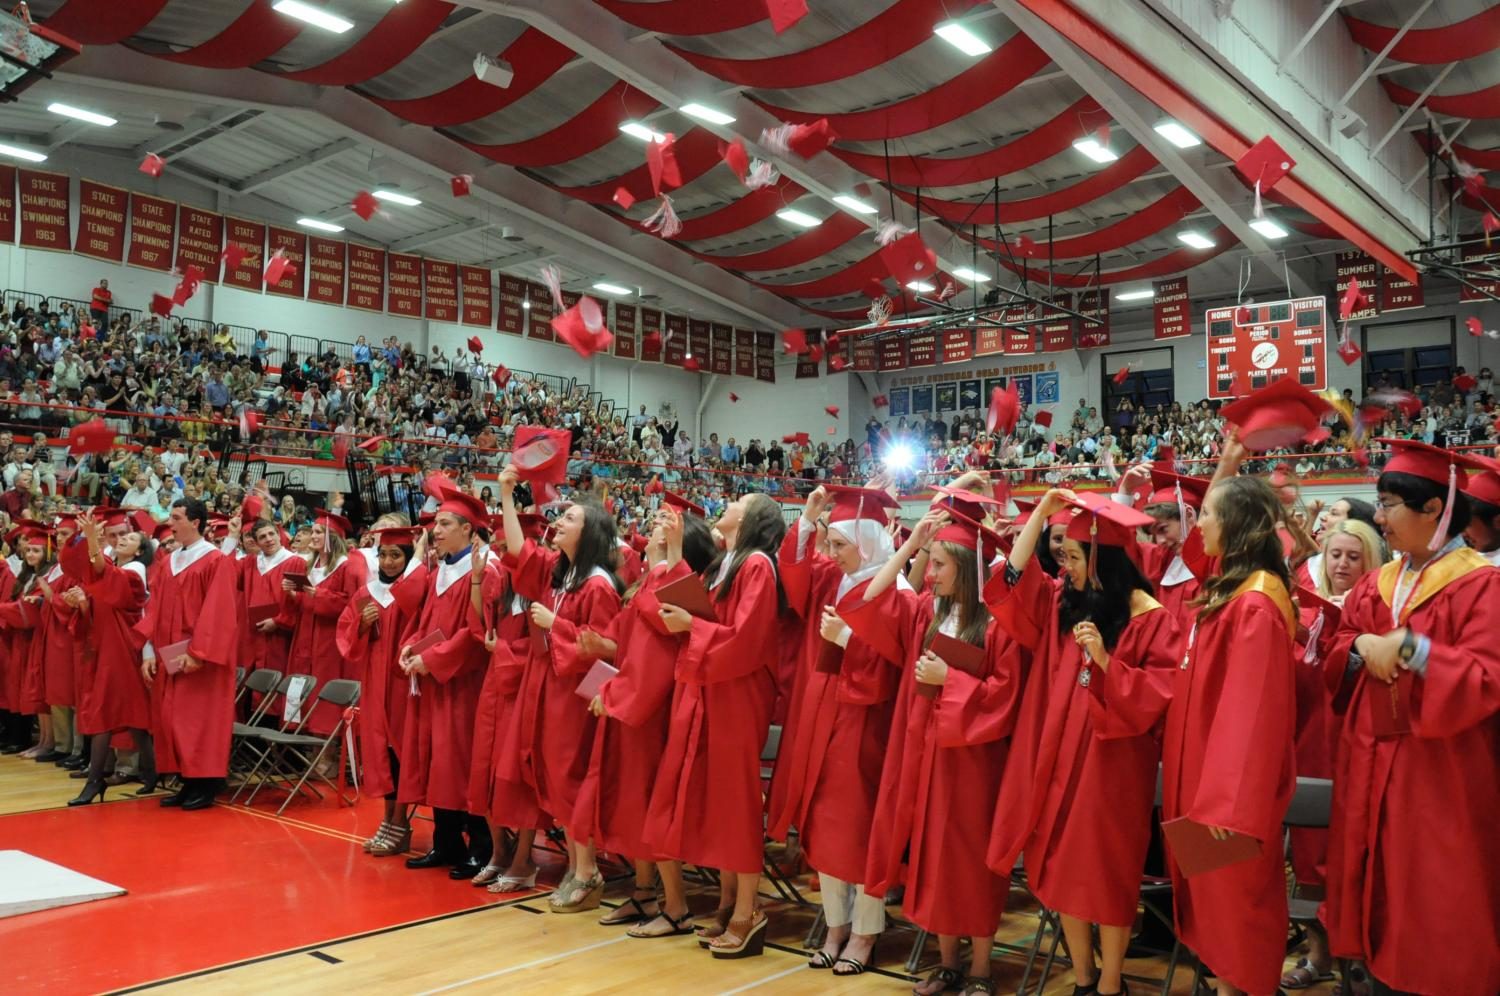 Before graduation on May 25, some seniors chose to leave behind a few parting words.